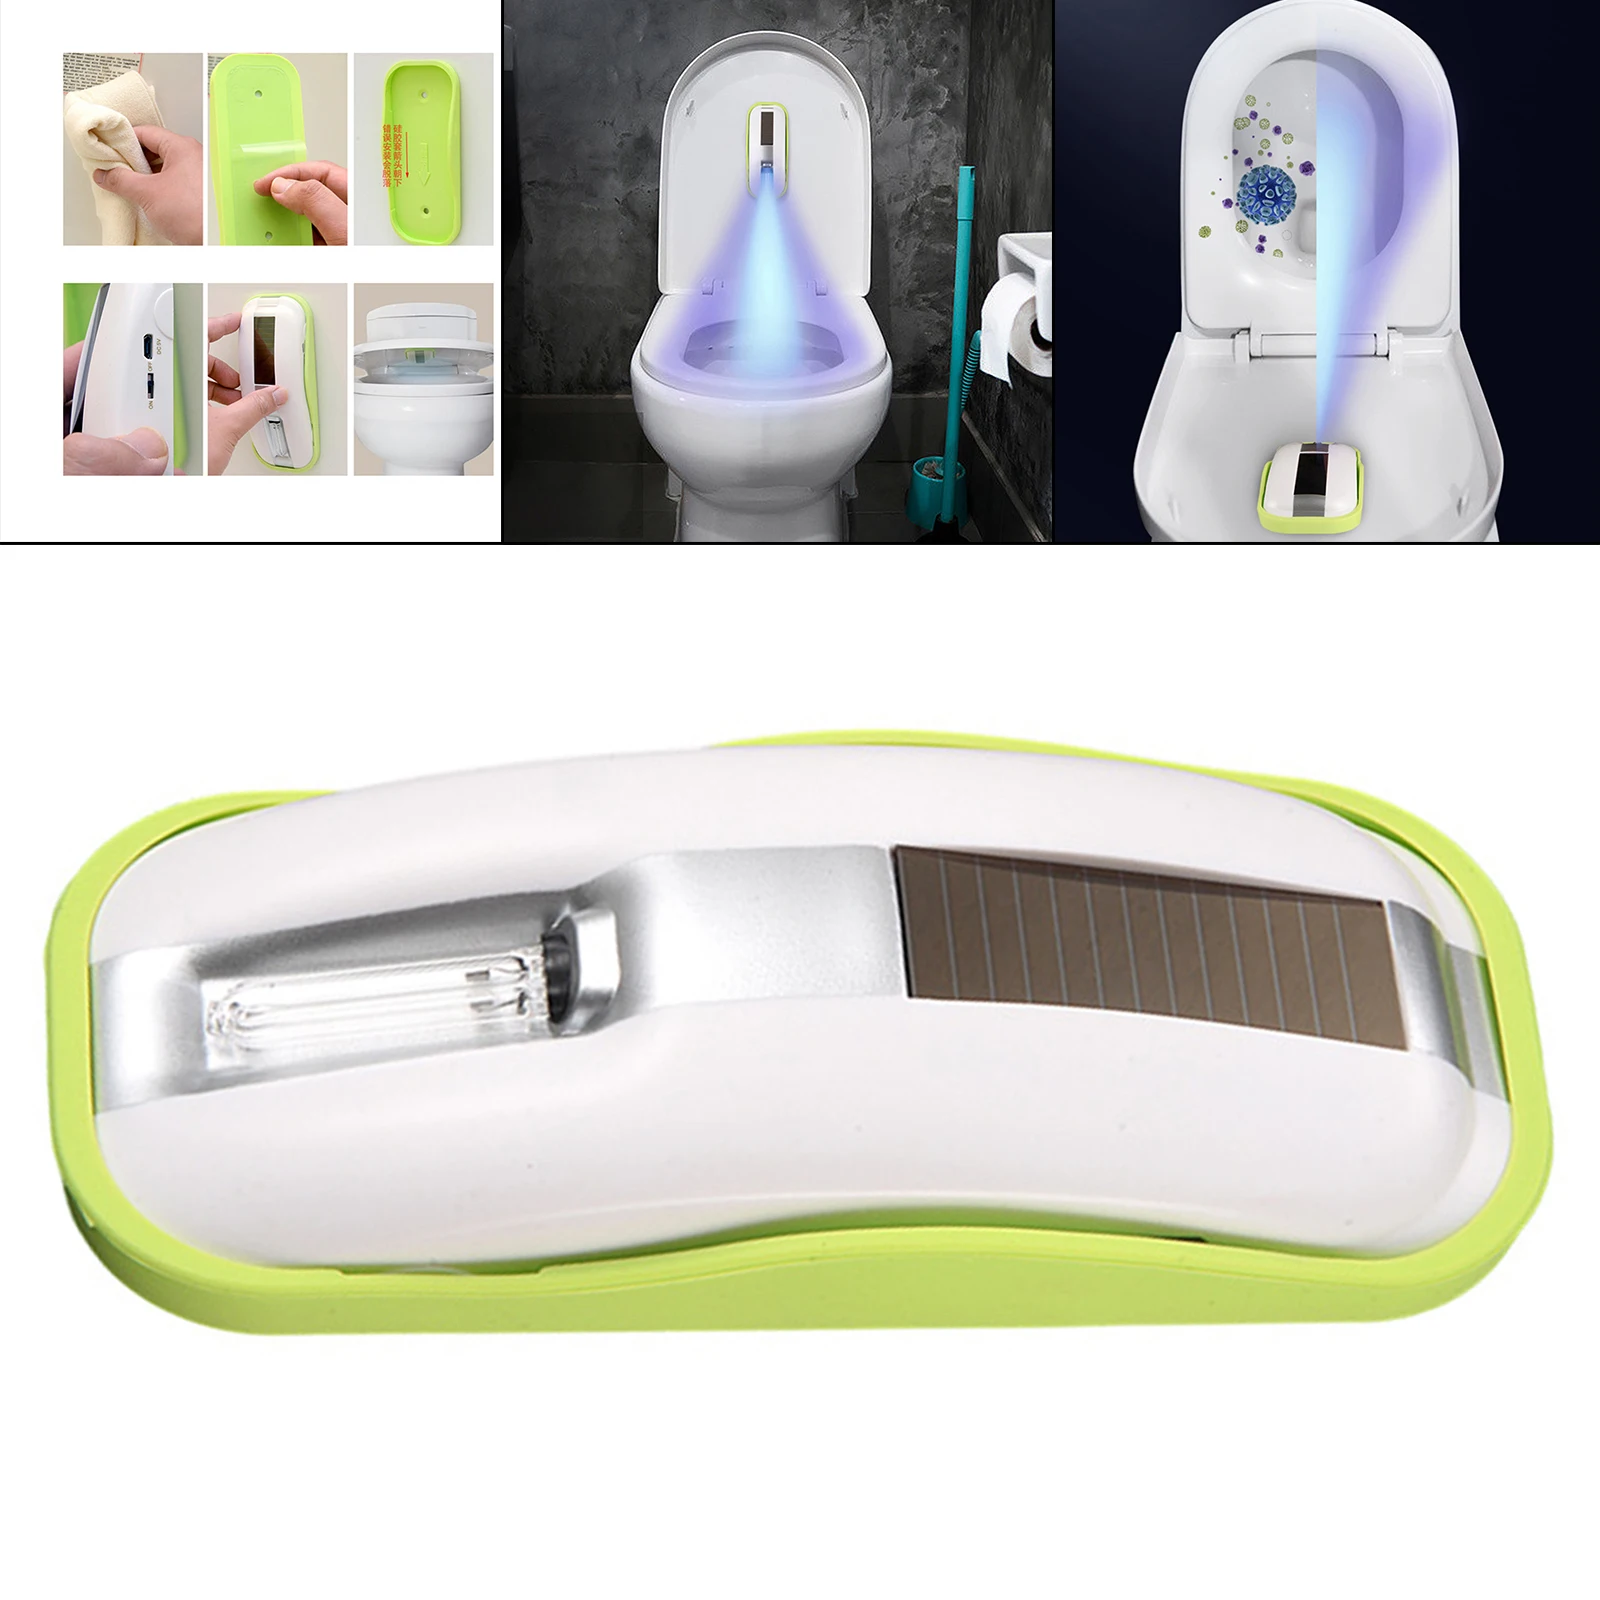 Toilet UV Light Sterilizer, Disinfection Light, USB Charging UV-C Disinfection Lamp, Ultraviolet Cleaning Gadget for Home Office